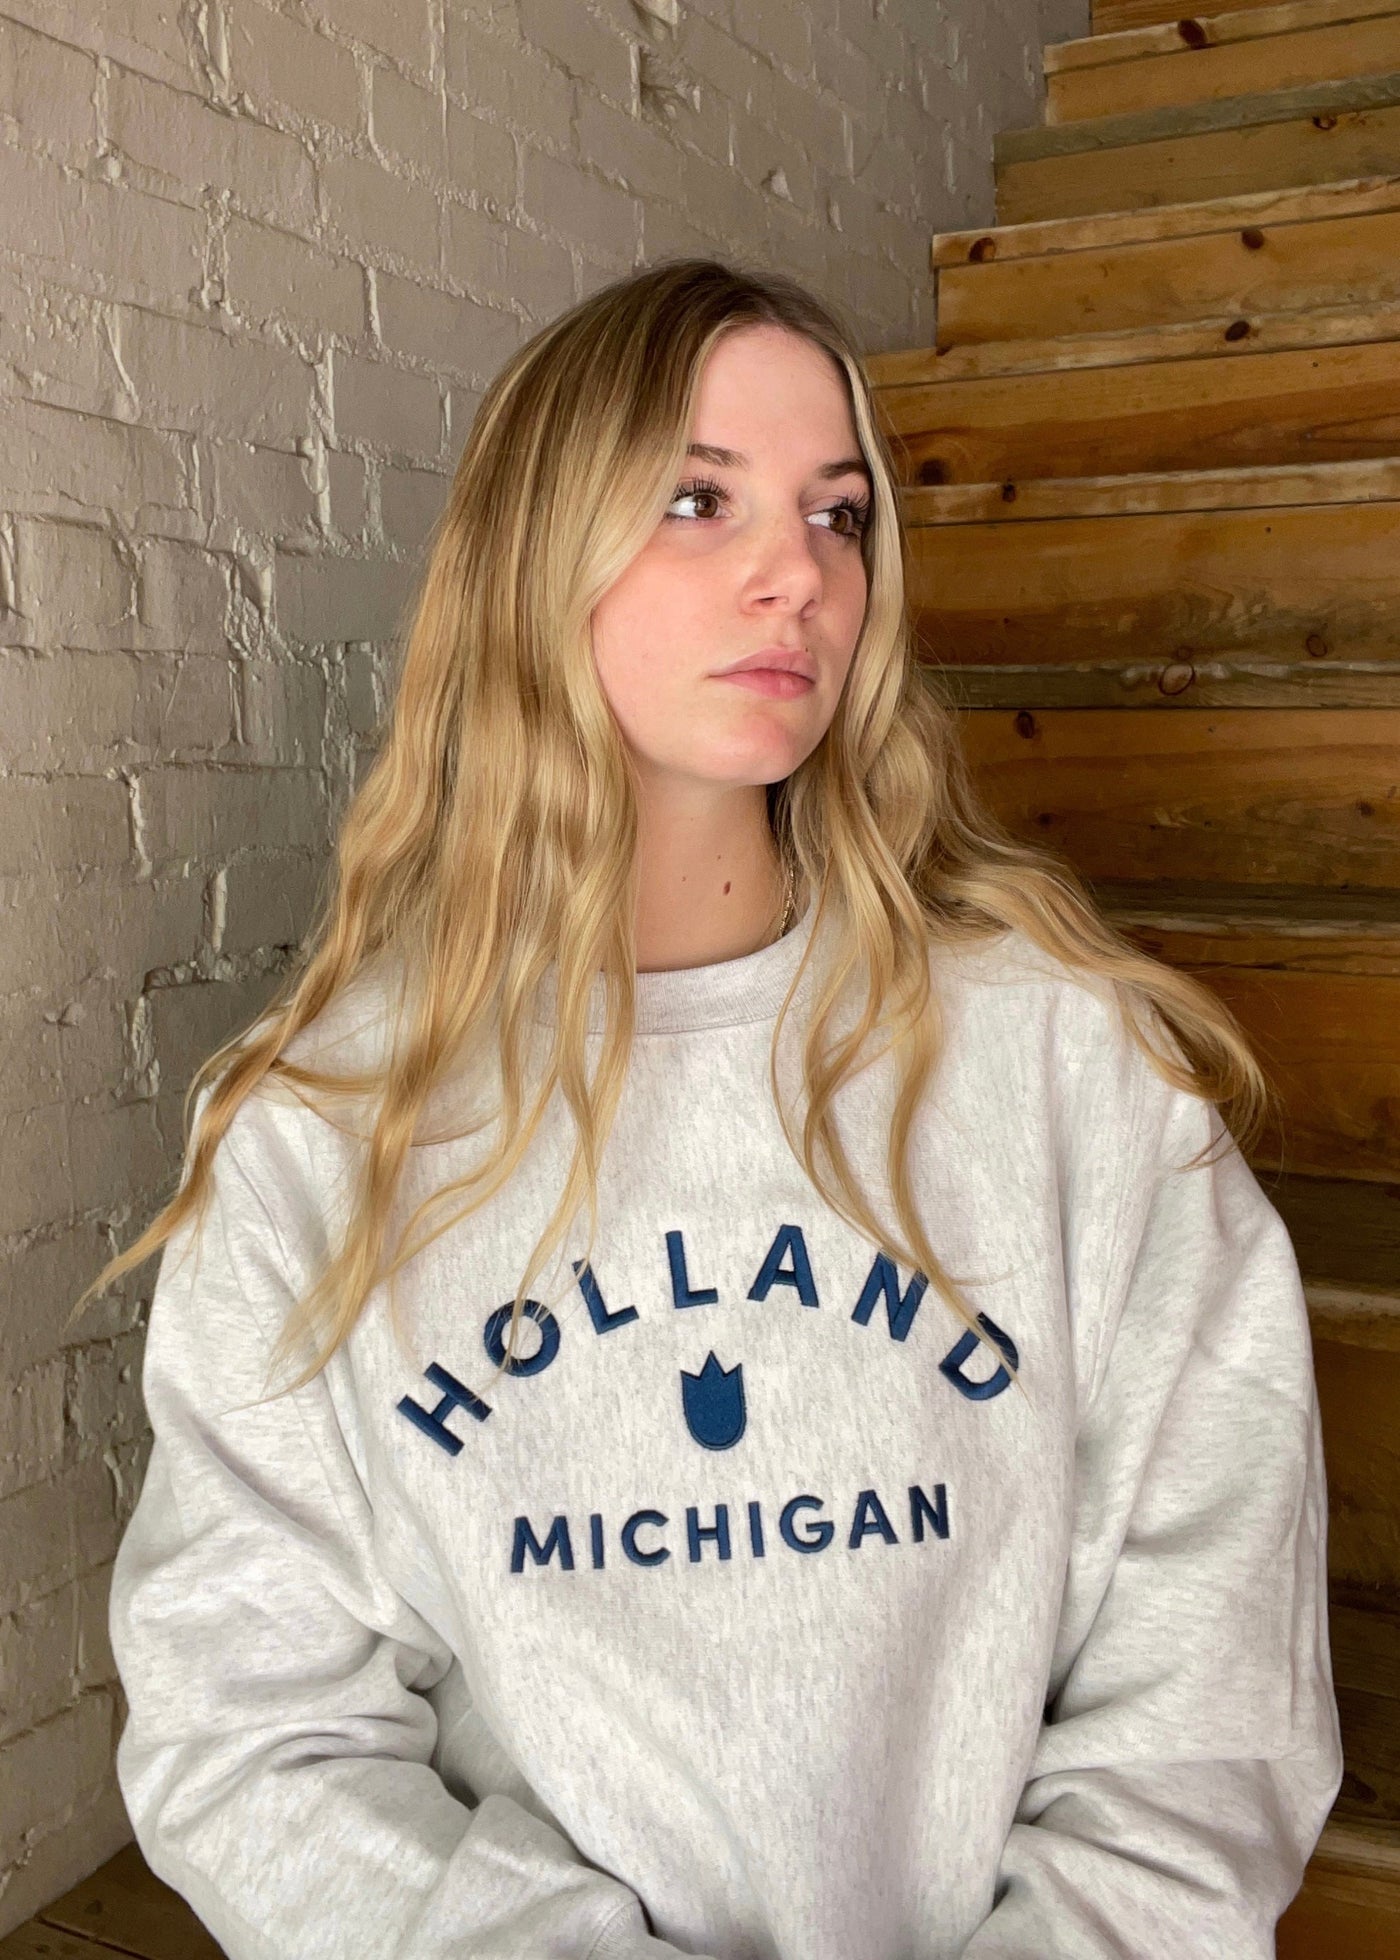 Blond female model wearing a heather grey crewneck sweatshirt with Holland Michigan and a tulip in navy embroidered on it.